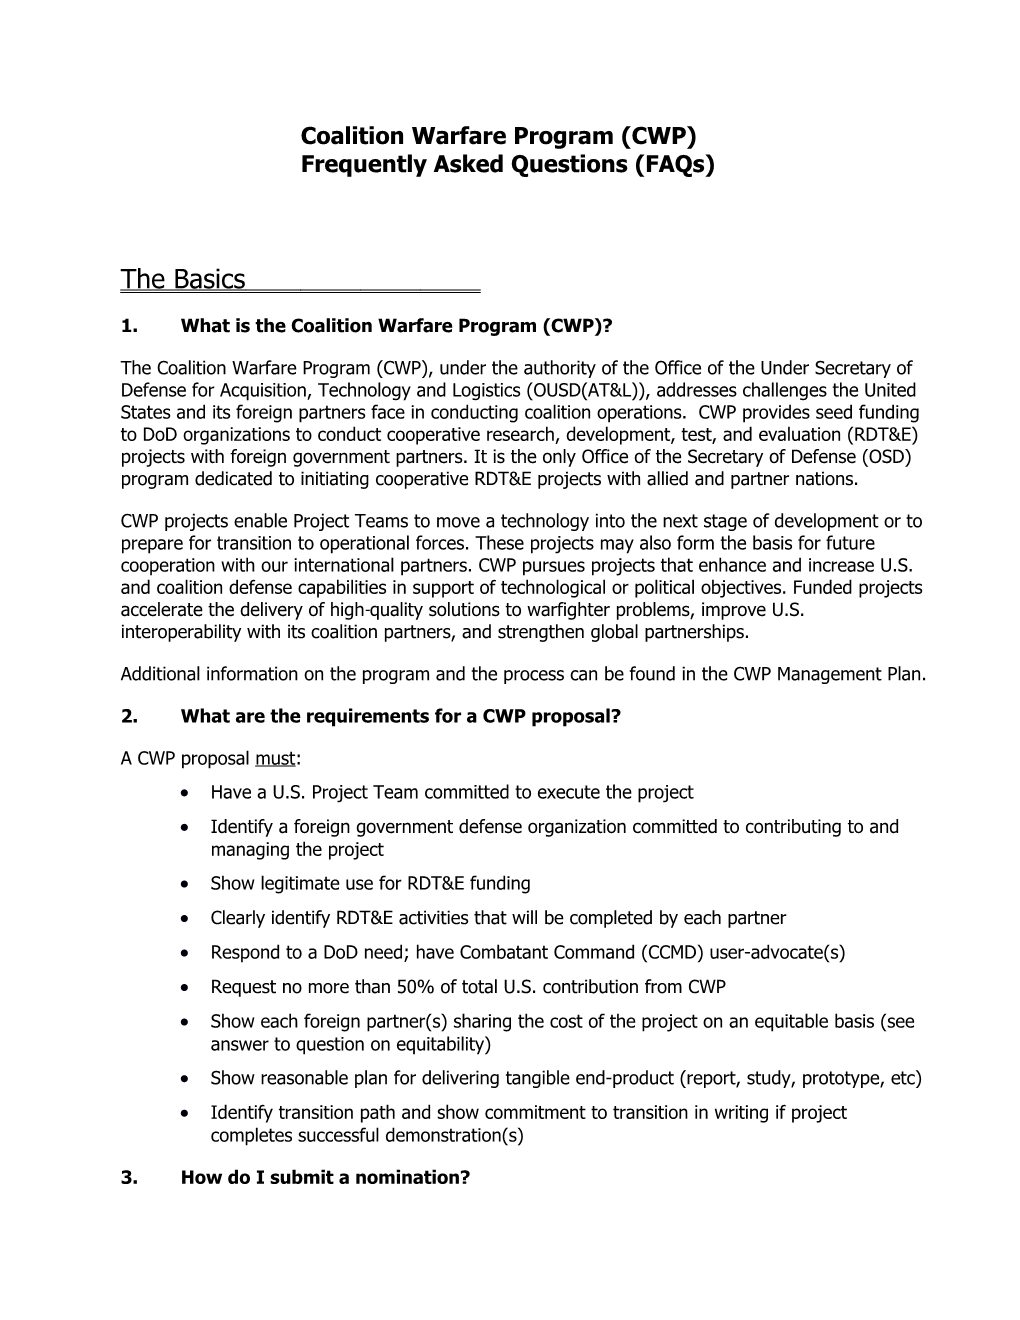 Coalition Warfare Program (CWP) Frequently Asked Questions (Faqs)